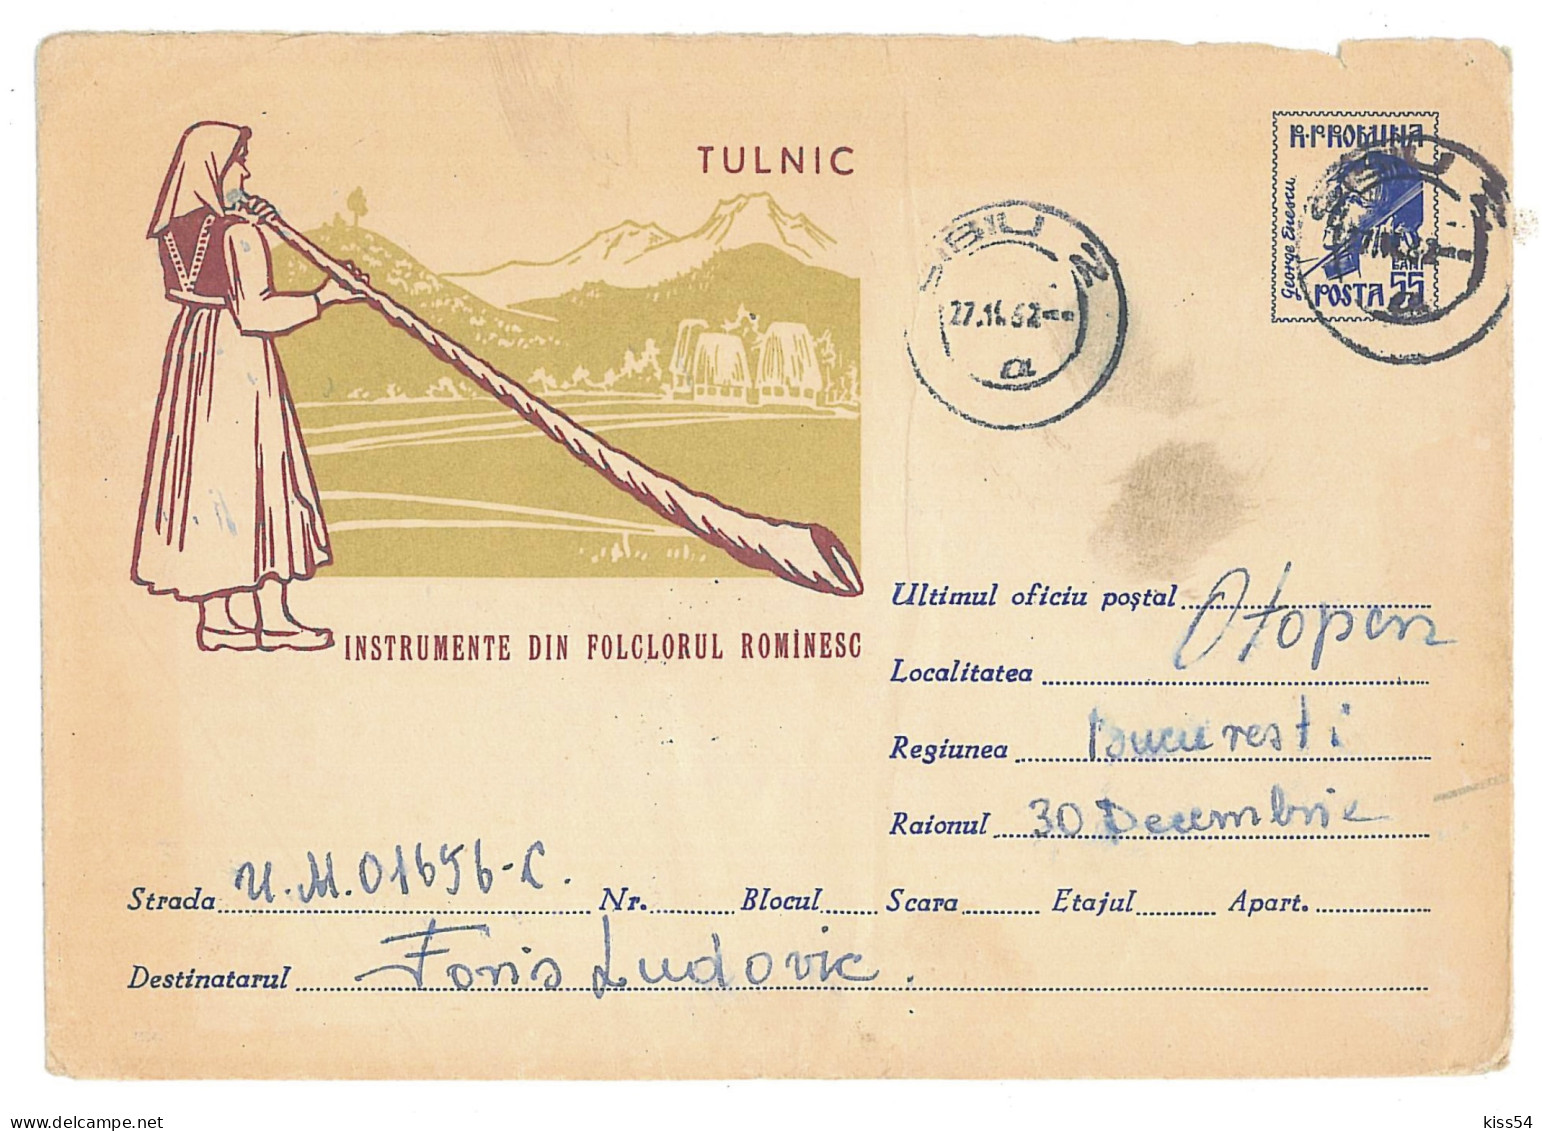 IP 61 - 0492a MUSIC, Popular Musical Instruments, Tulnic, Romania - Stationery - Used - 1961 - Entiers Postaux